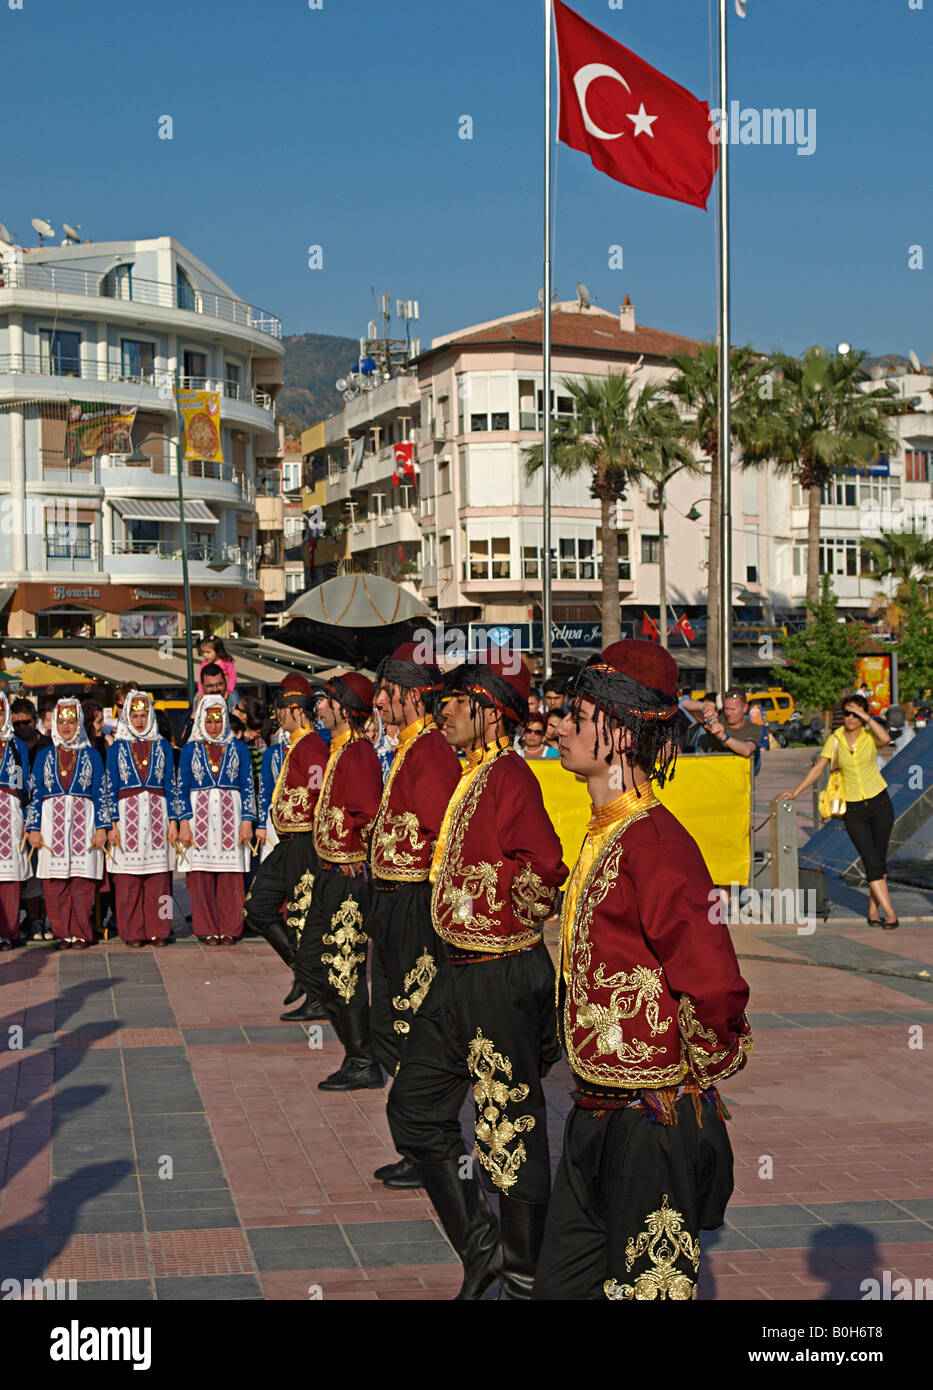 TURKISH YOUNG PEOPLE WEARING  TRADITIONAL CLOTHES AND PERFORMING DANCE AT MARMARIS MUGLA TURKEY DURING FESTIVAL OF YOUTH Stock Photo